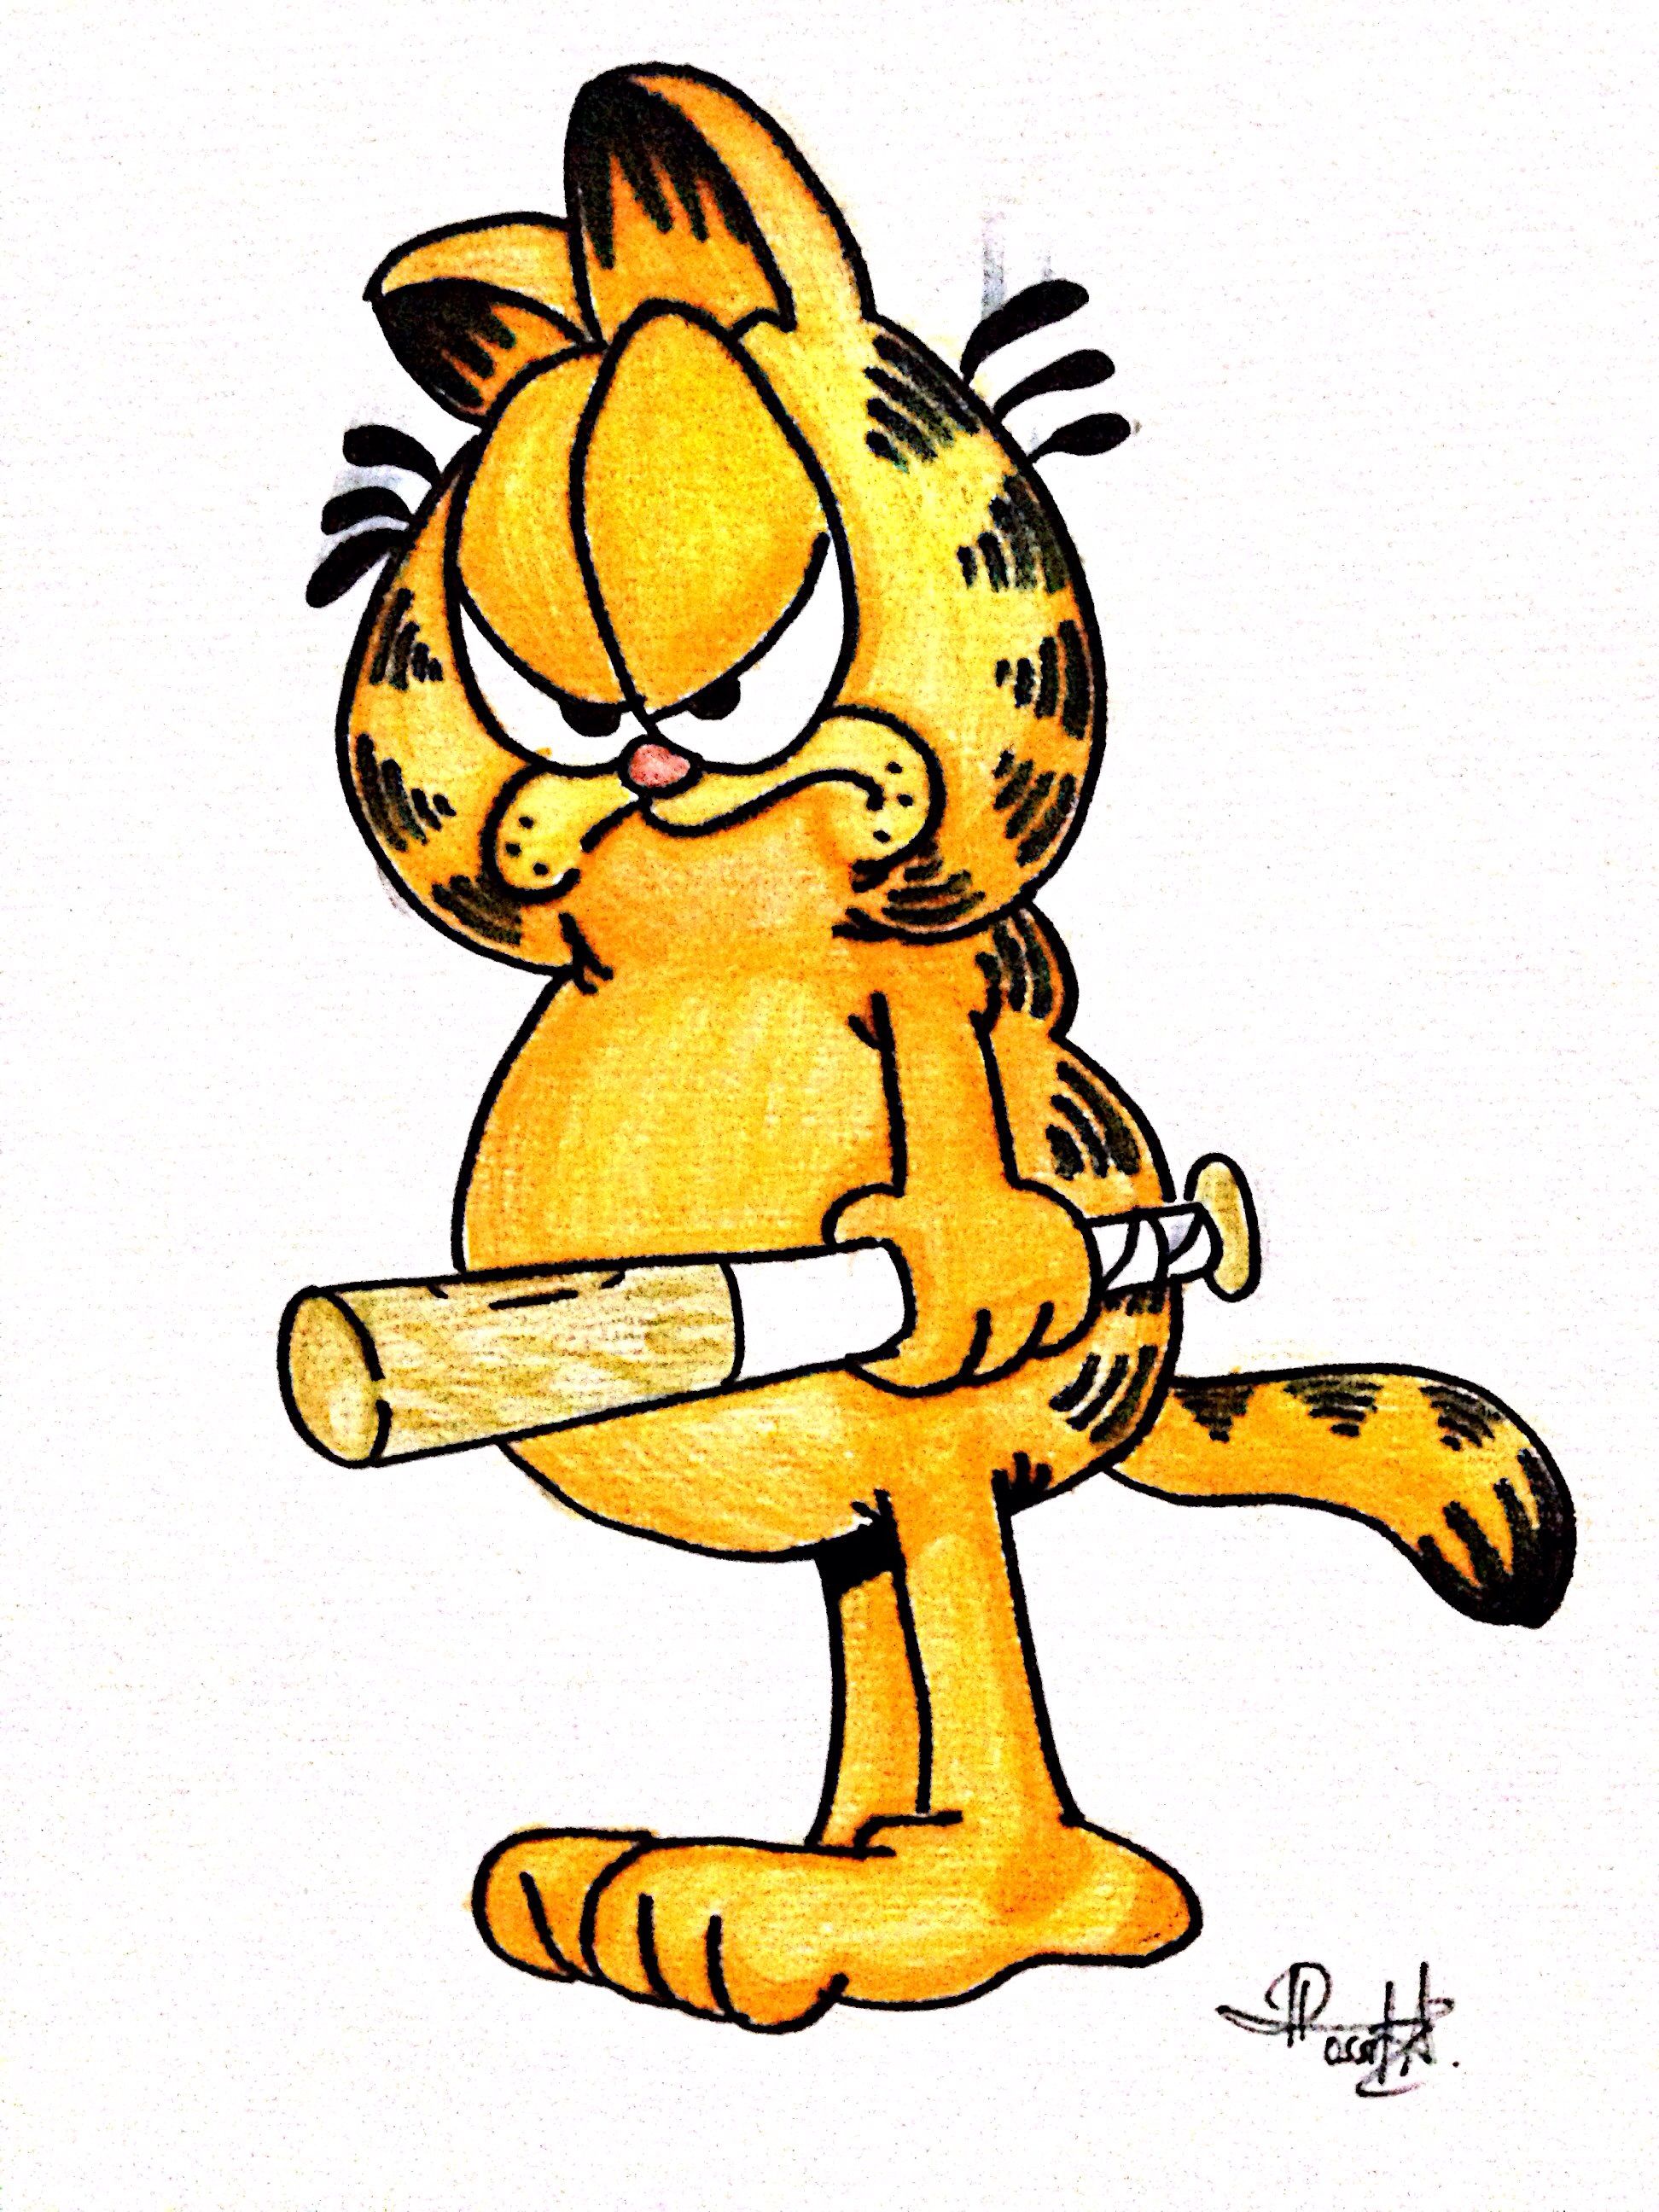 Garfield Drawing | Free download on ClipArtMag